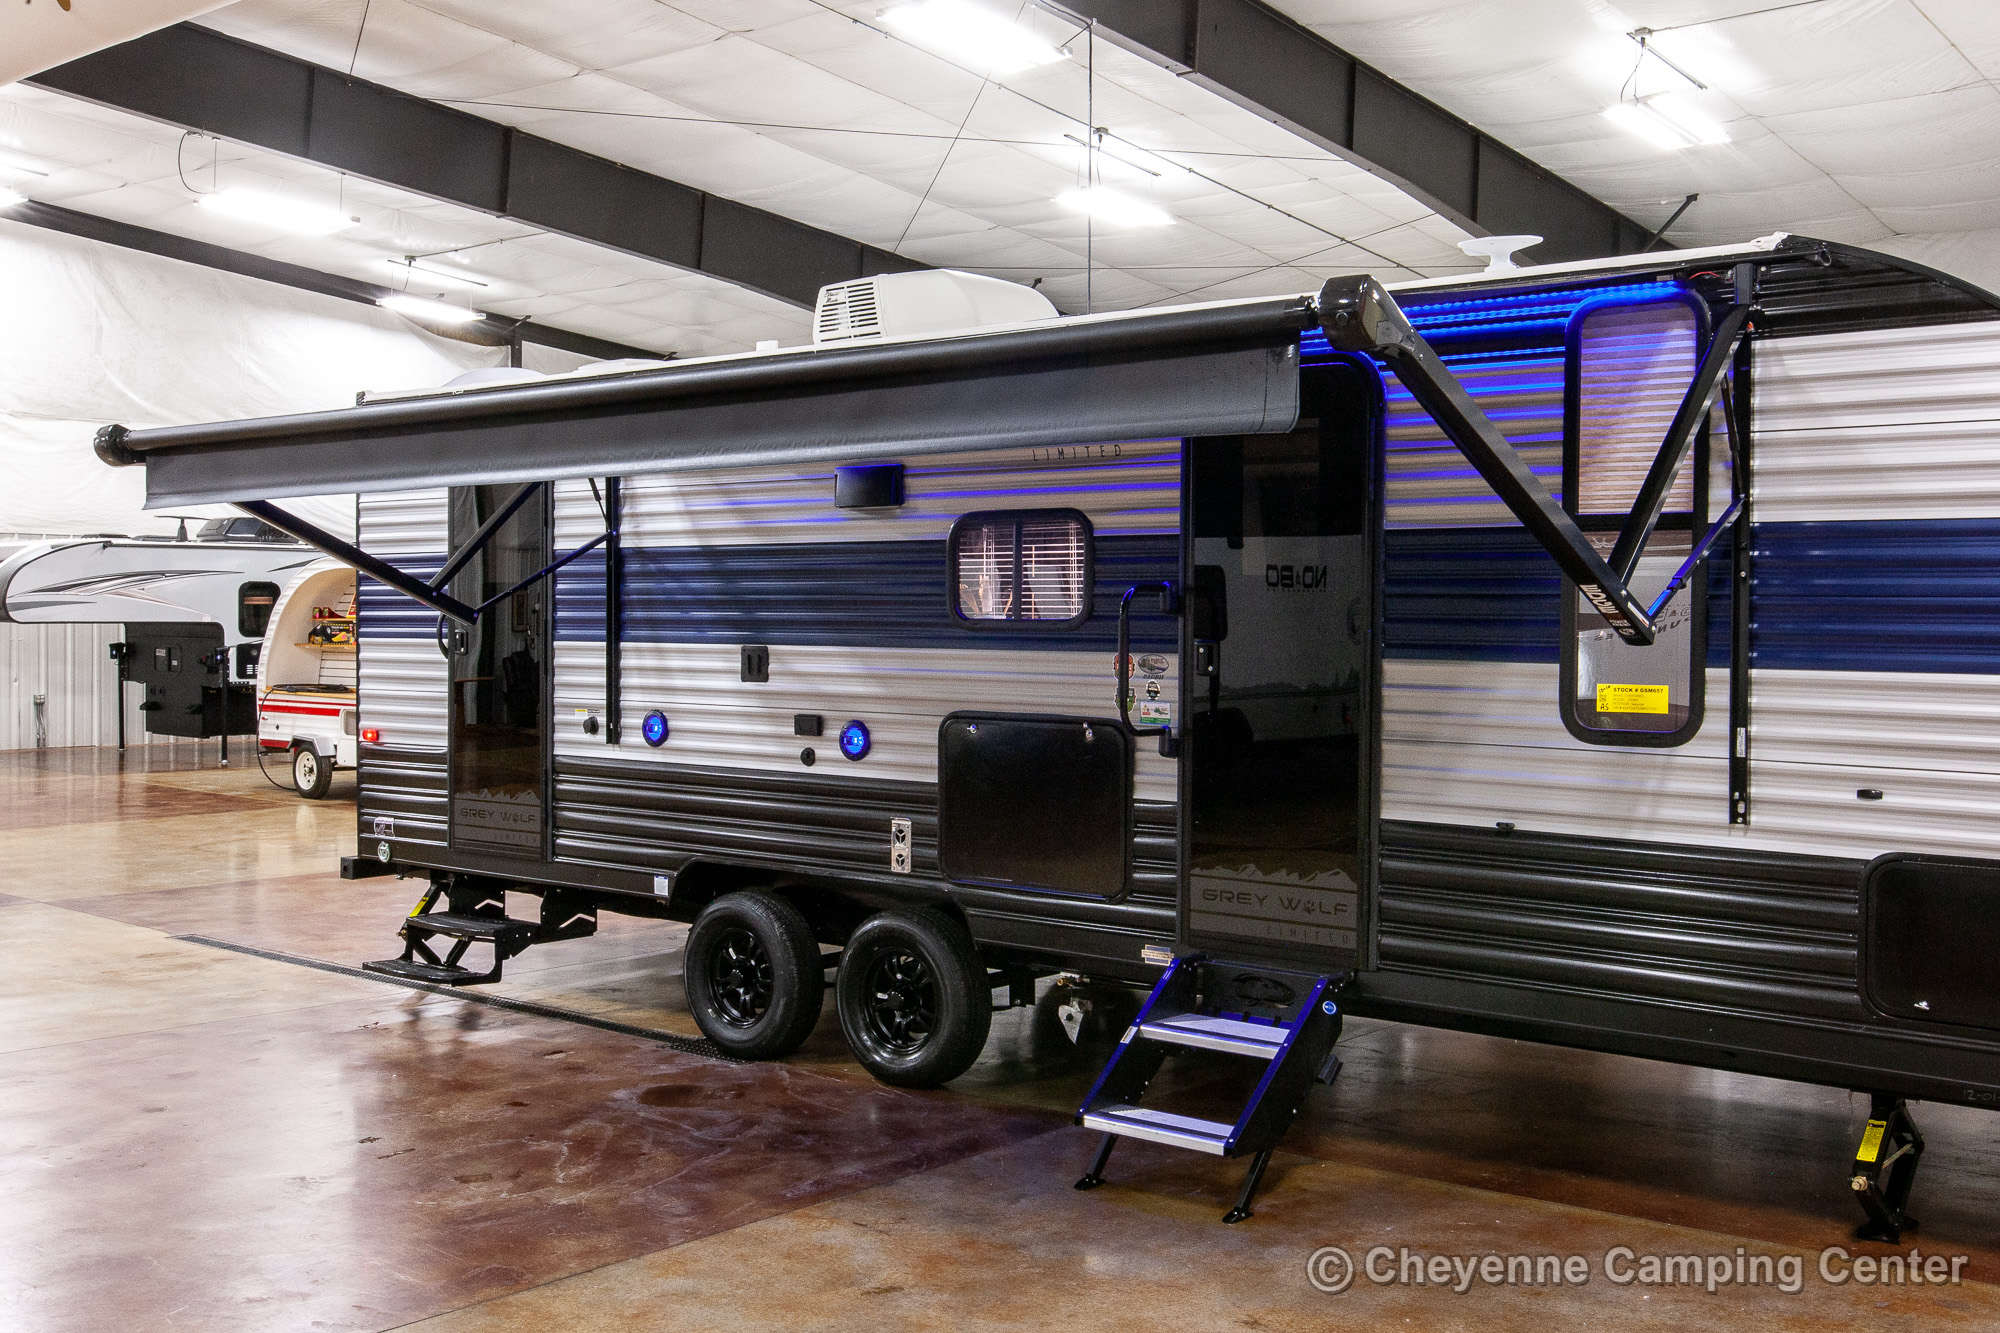 2022 Forest River Cherokee Grey Wolf 23DBH Bunkhouse Travel Trailer Exterior Image